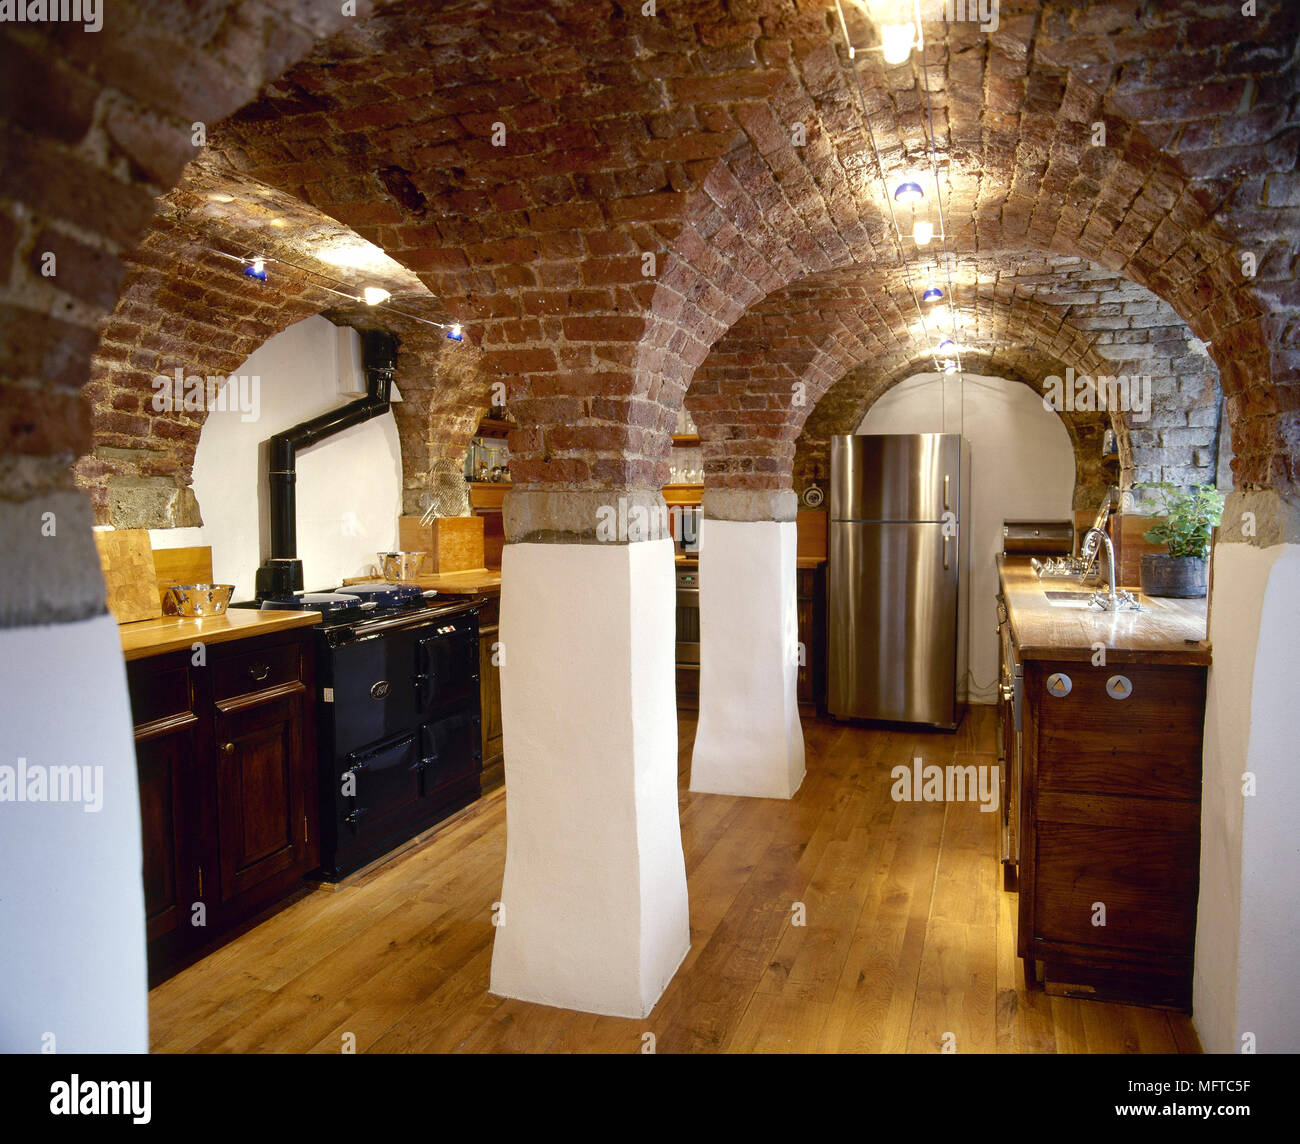 Rustic Kitchen In Converted Cellar With Exposed Brickwork